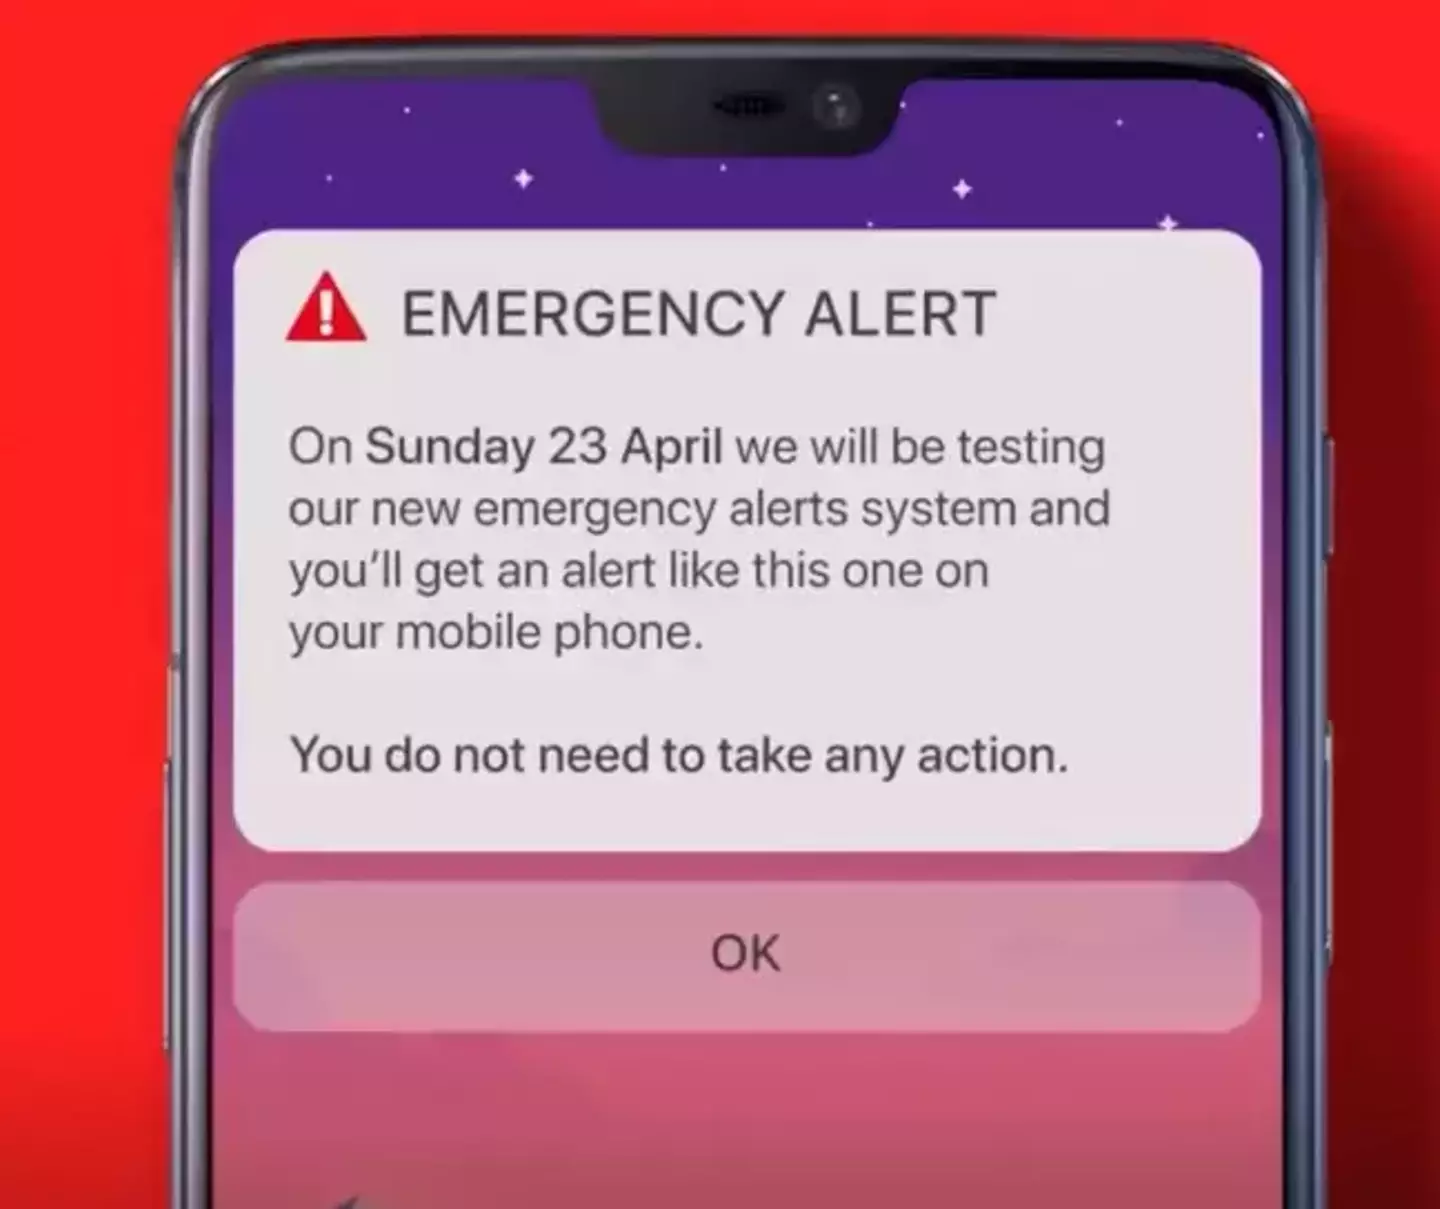 Most phones in the UK will sound with an alarm this coming Sunday.